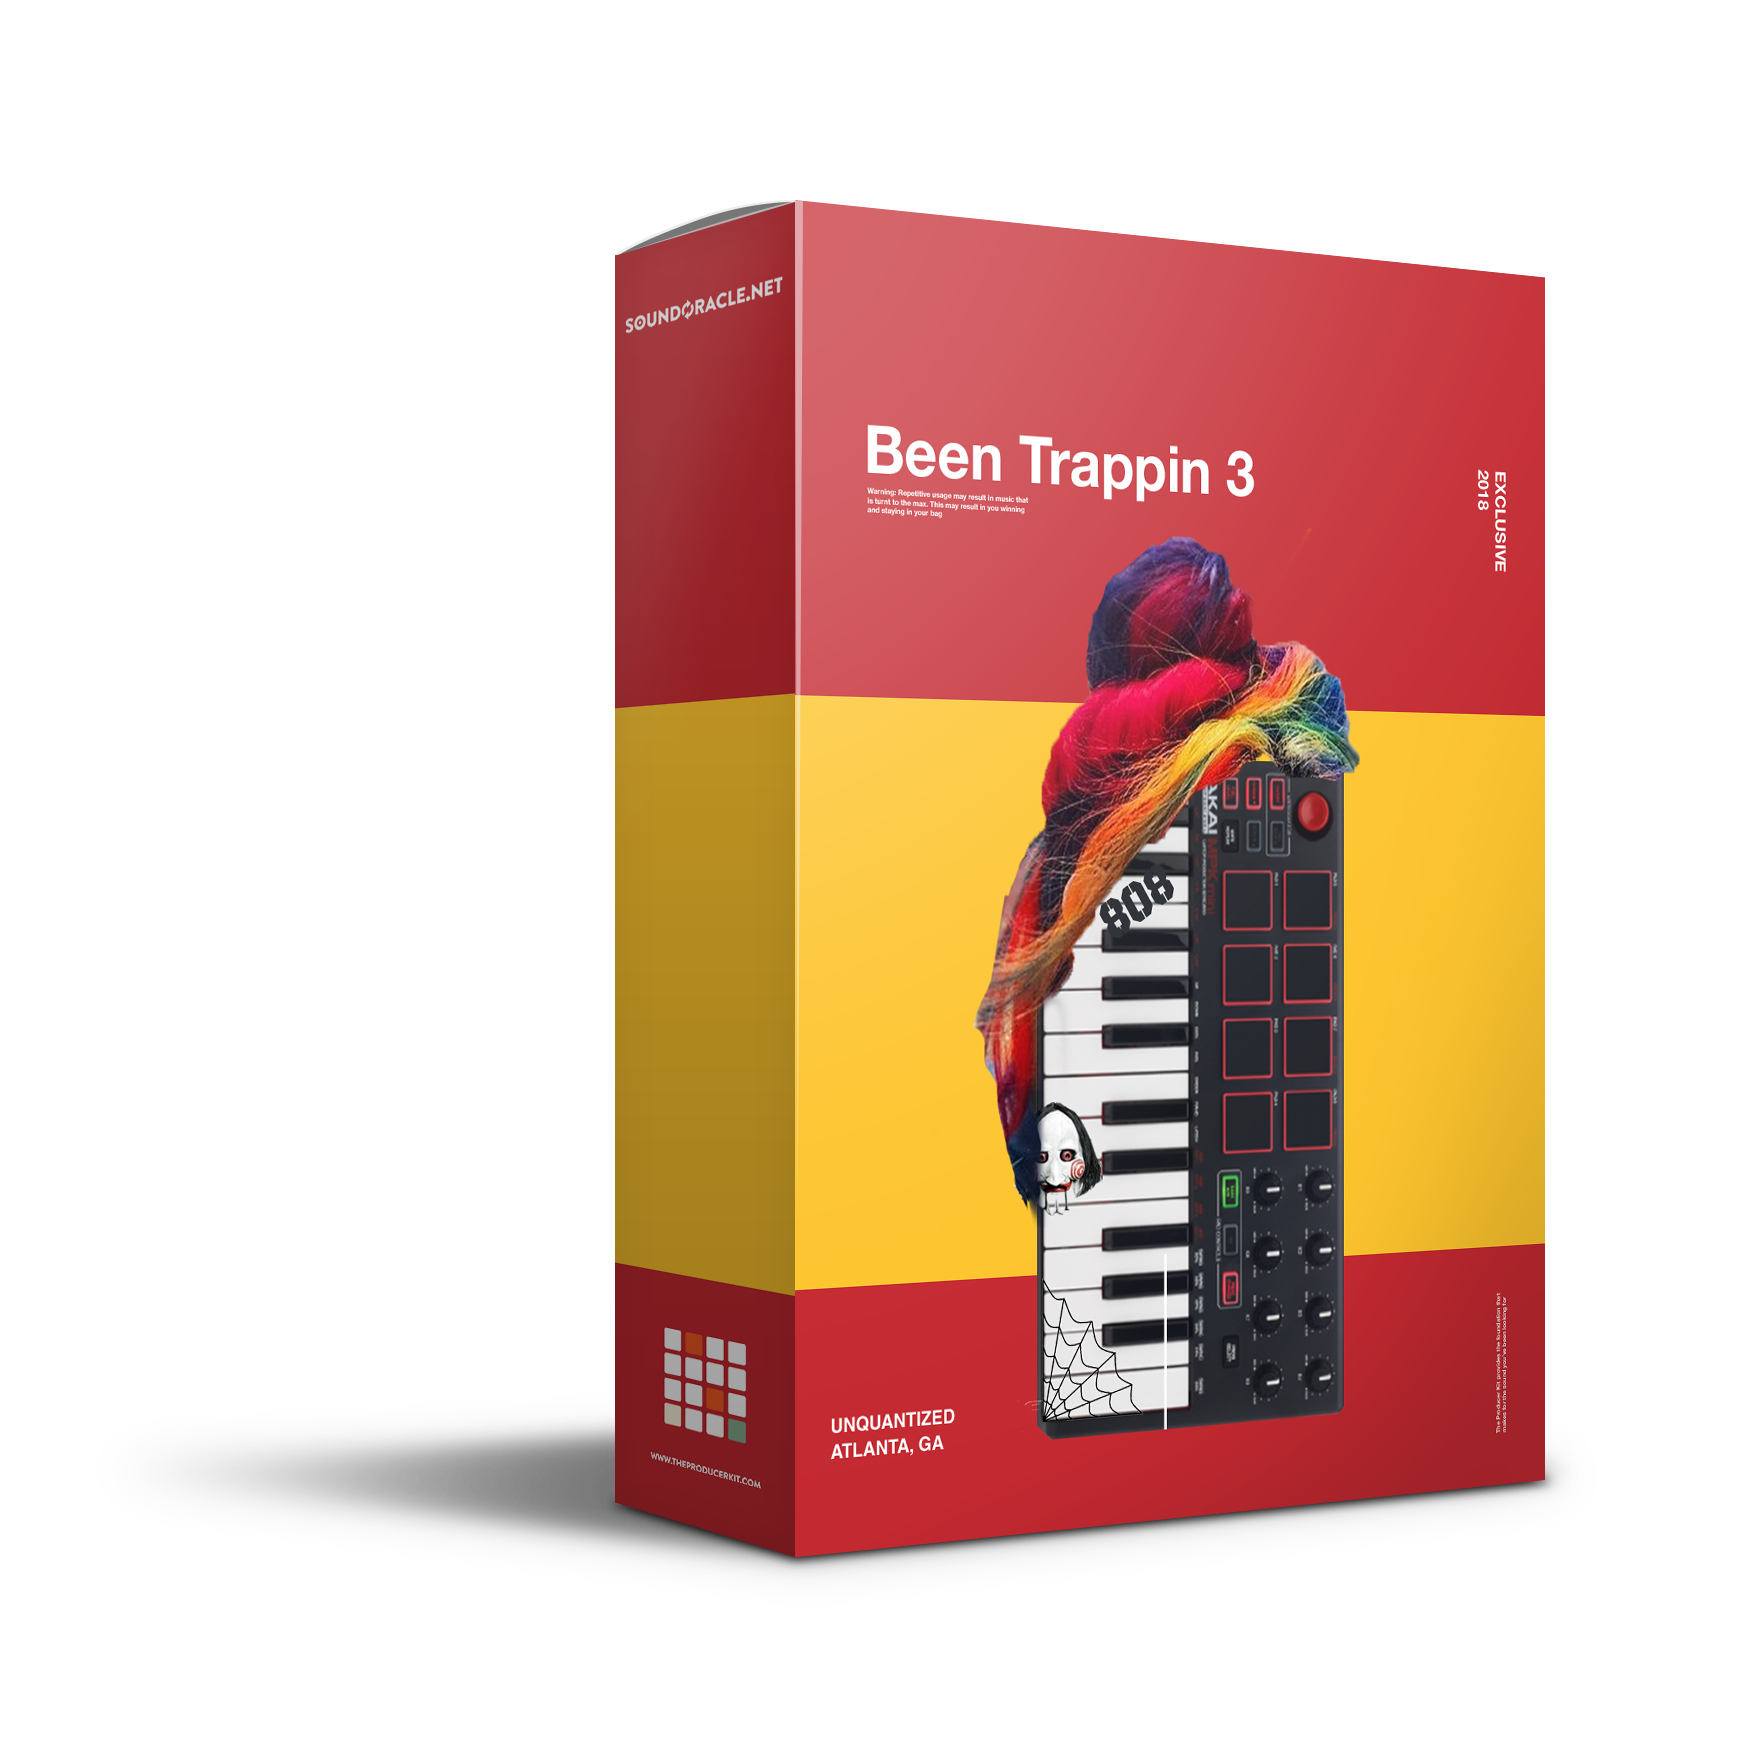 Been Trappin, Been Trappin Series, Been Trappin 3, BEEN TRAPPIN III, Trap Boomin, Trap, Trap Drums, Trap Sample Kit, Trap Sounds, Drums, 808, Perc, Percussion Loops, Modern Trap Drums, Drum Sounds, Drum Pack, Drum Kit, Loops, Melody Loops, Royalty Free, SoundOracle, Triza, The Producer Kit, Unquantized, Unquantized Podcast, Music Producers, Producers, Beats, Beatmakers, Beat Making, Sounds, Sound Kits, Sample Kit, Sound Libraries, SoundOracle Sound Kits, Ableton, Top 40, Pop, Hip Hop, Hip-Hop